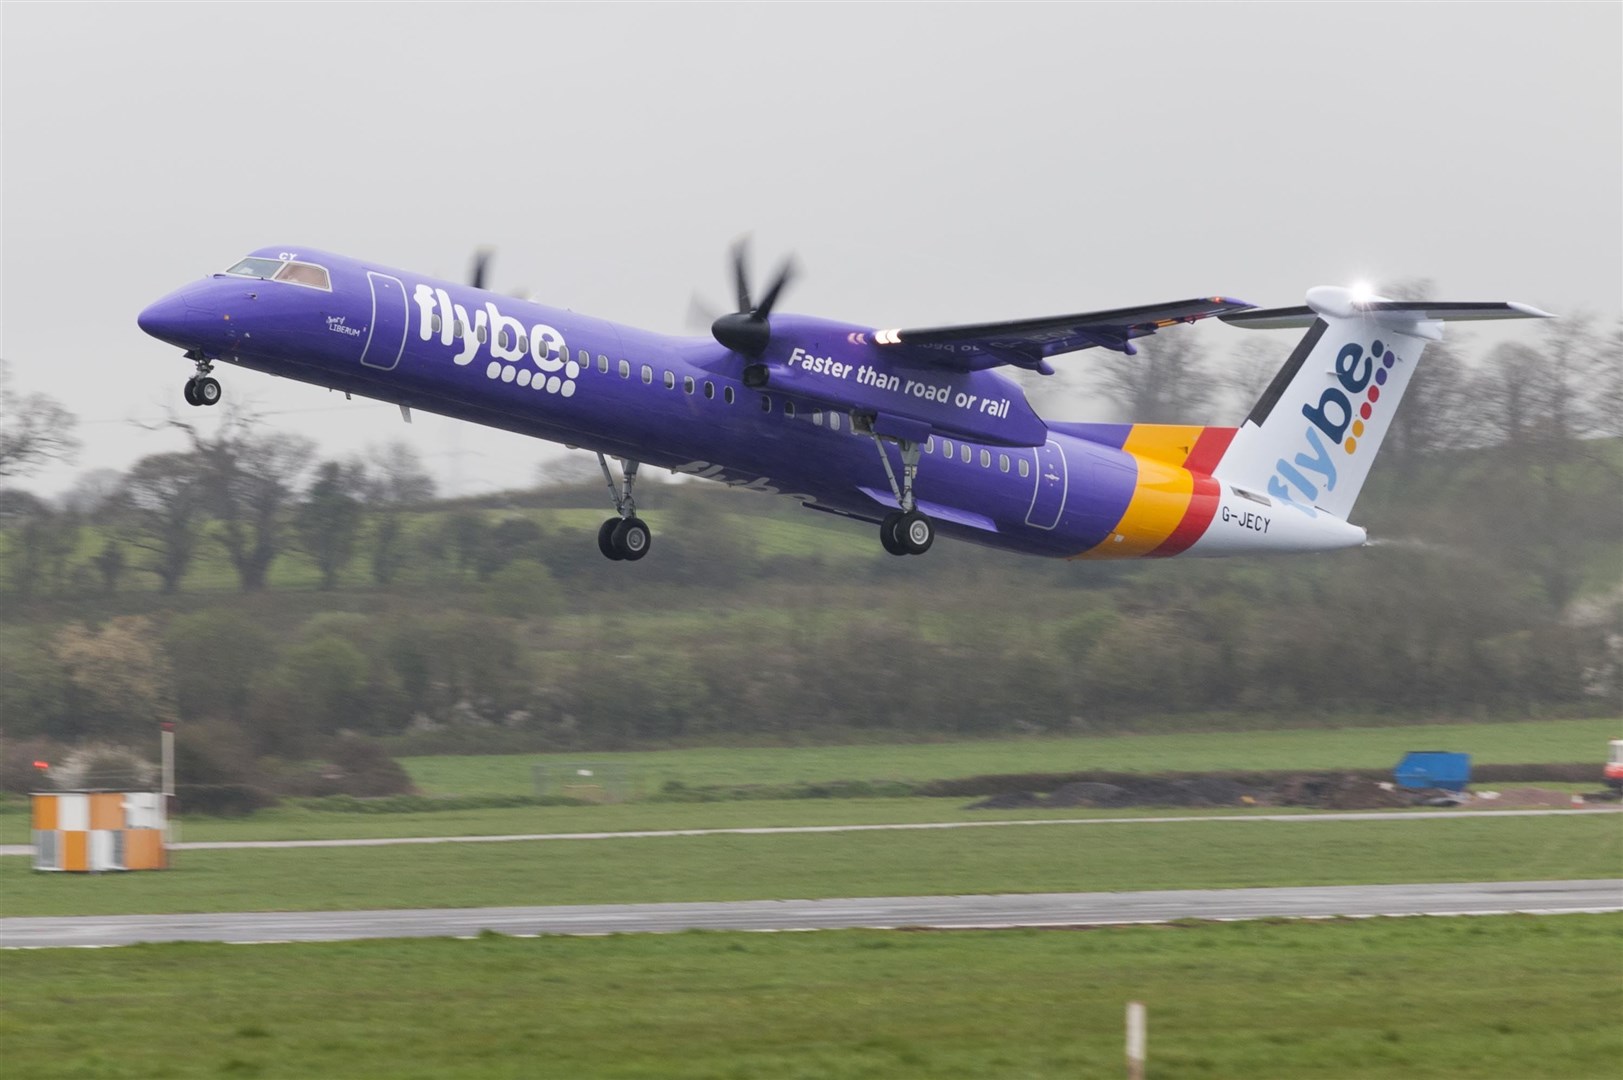 A Flybe aircraft takes off.